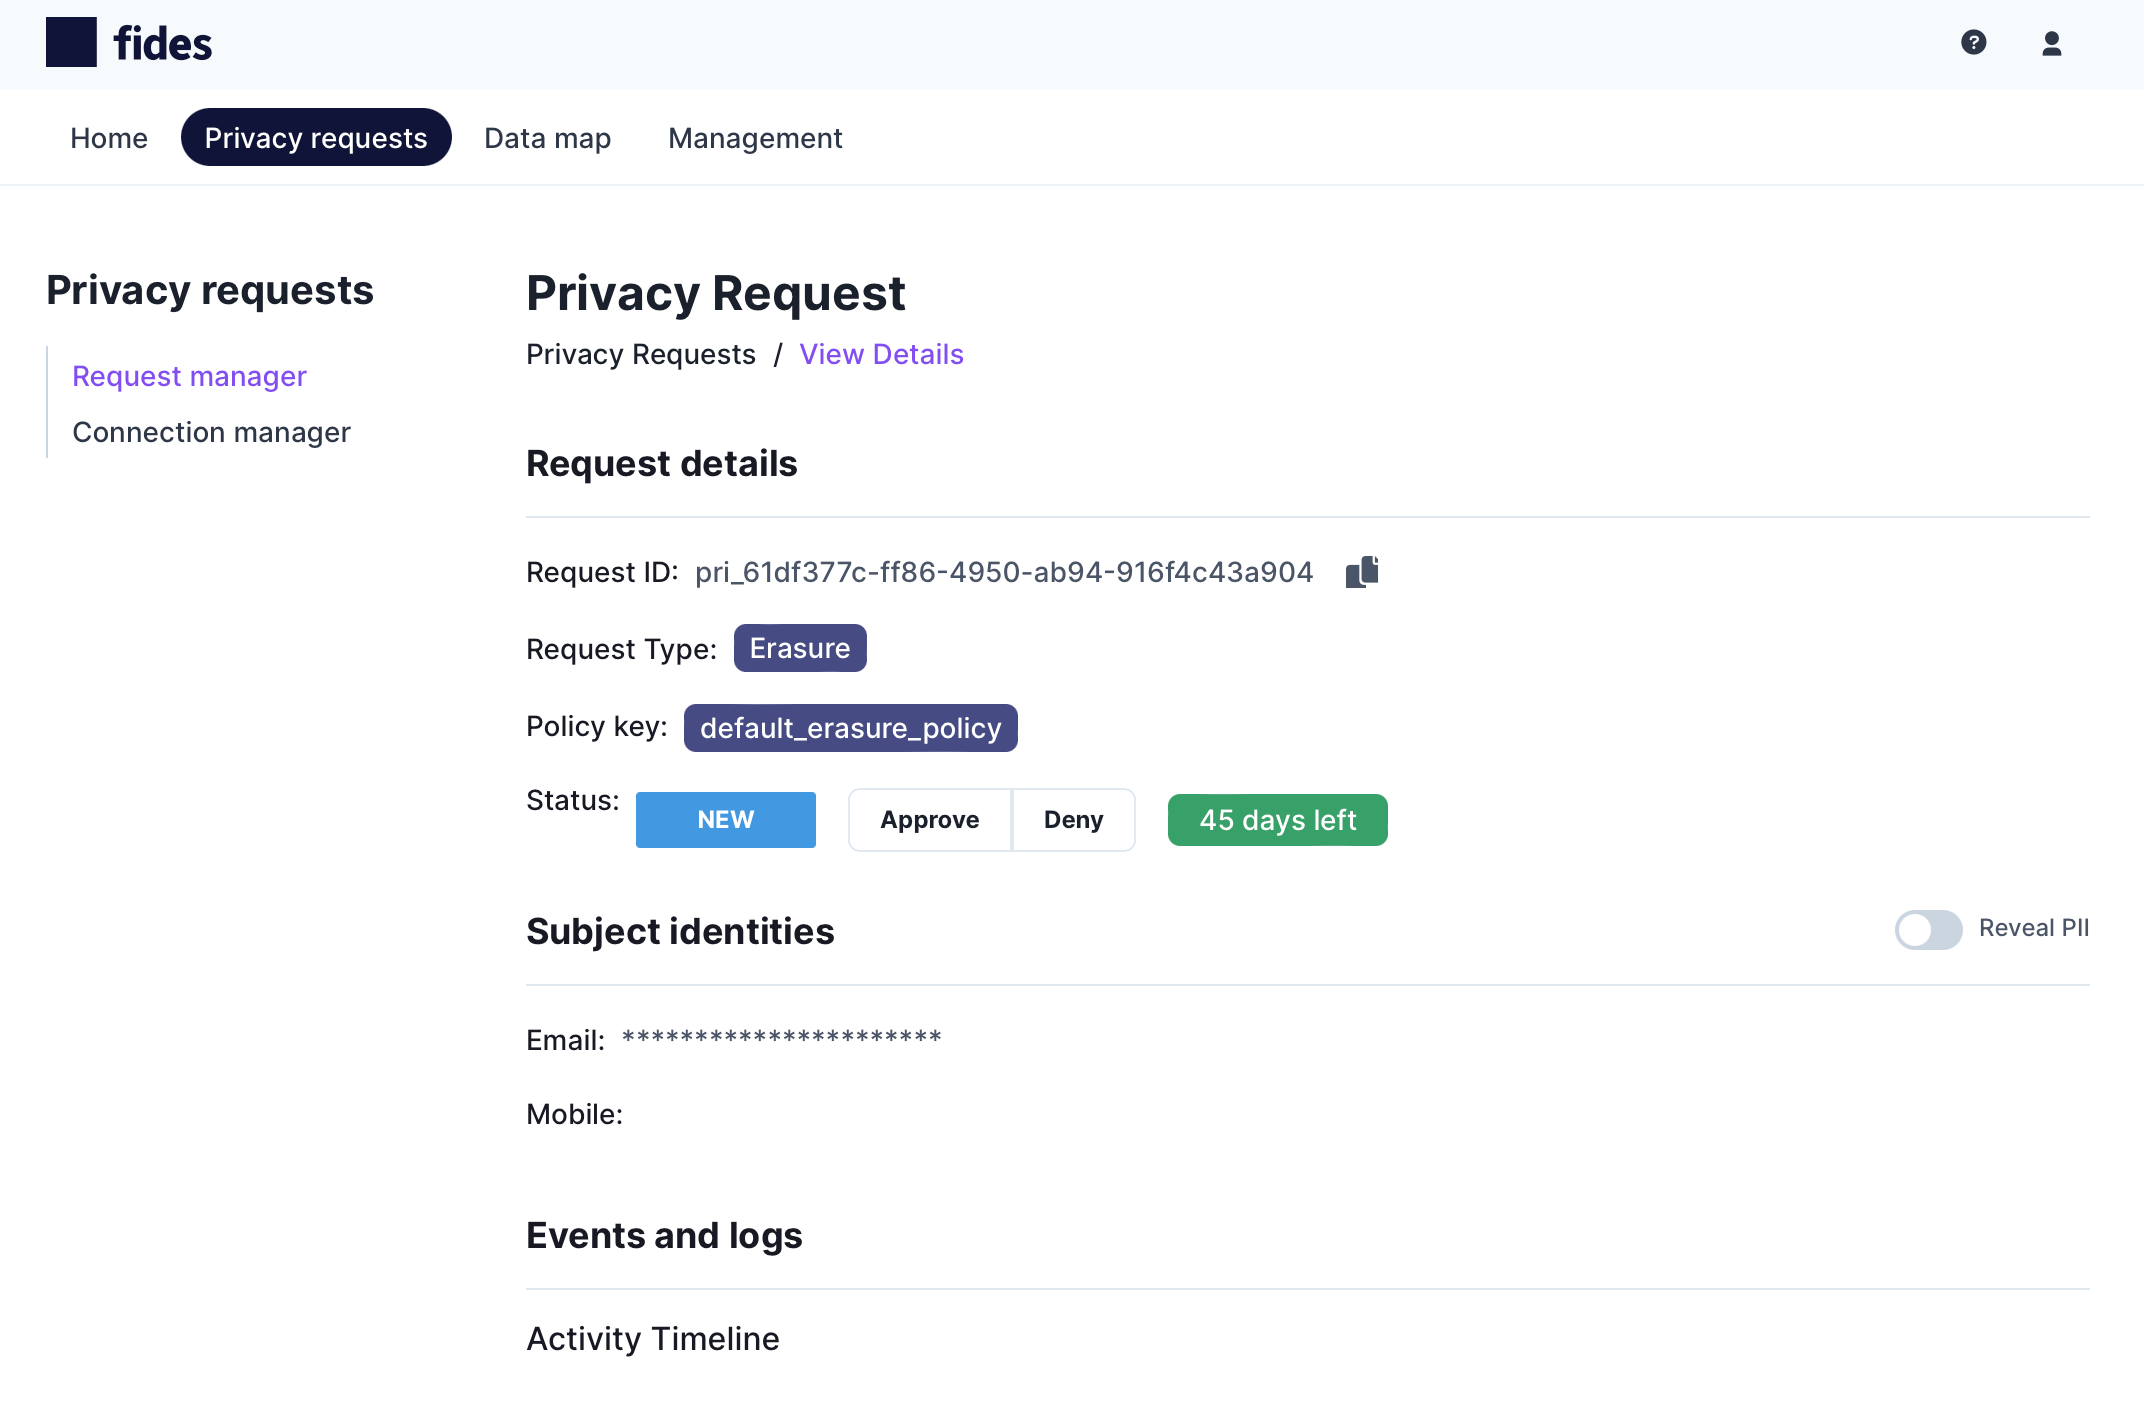 Privacy Request Details Page